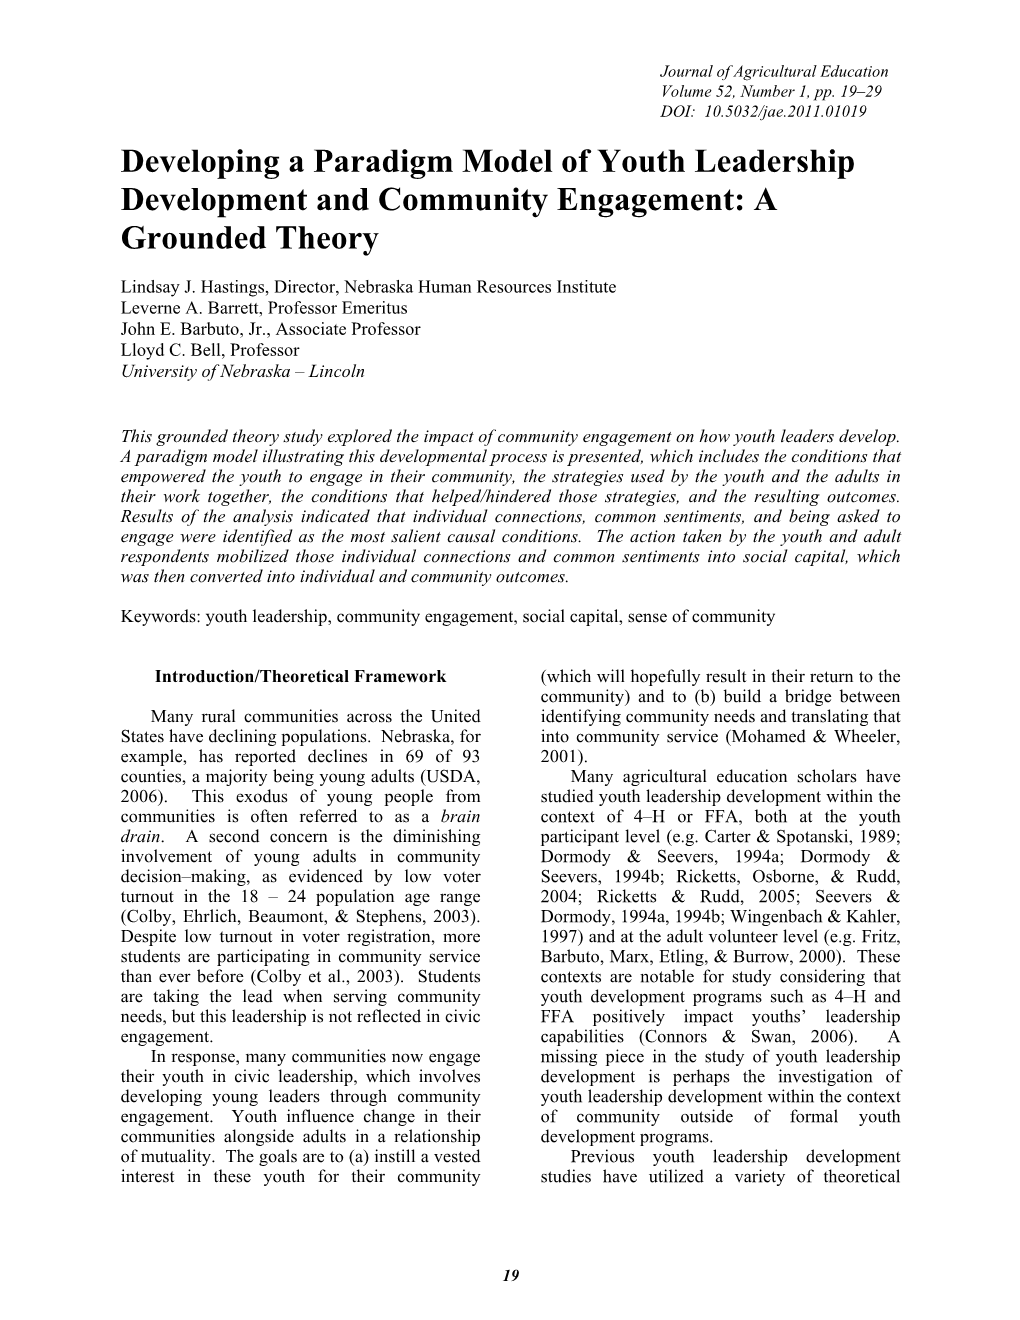 Developing a Paradigm Model of Youth Leadership Development and Community Engagement: a Grounded Theory